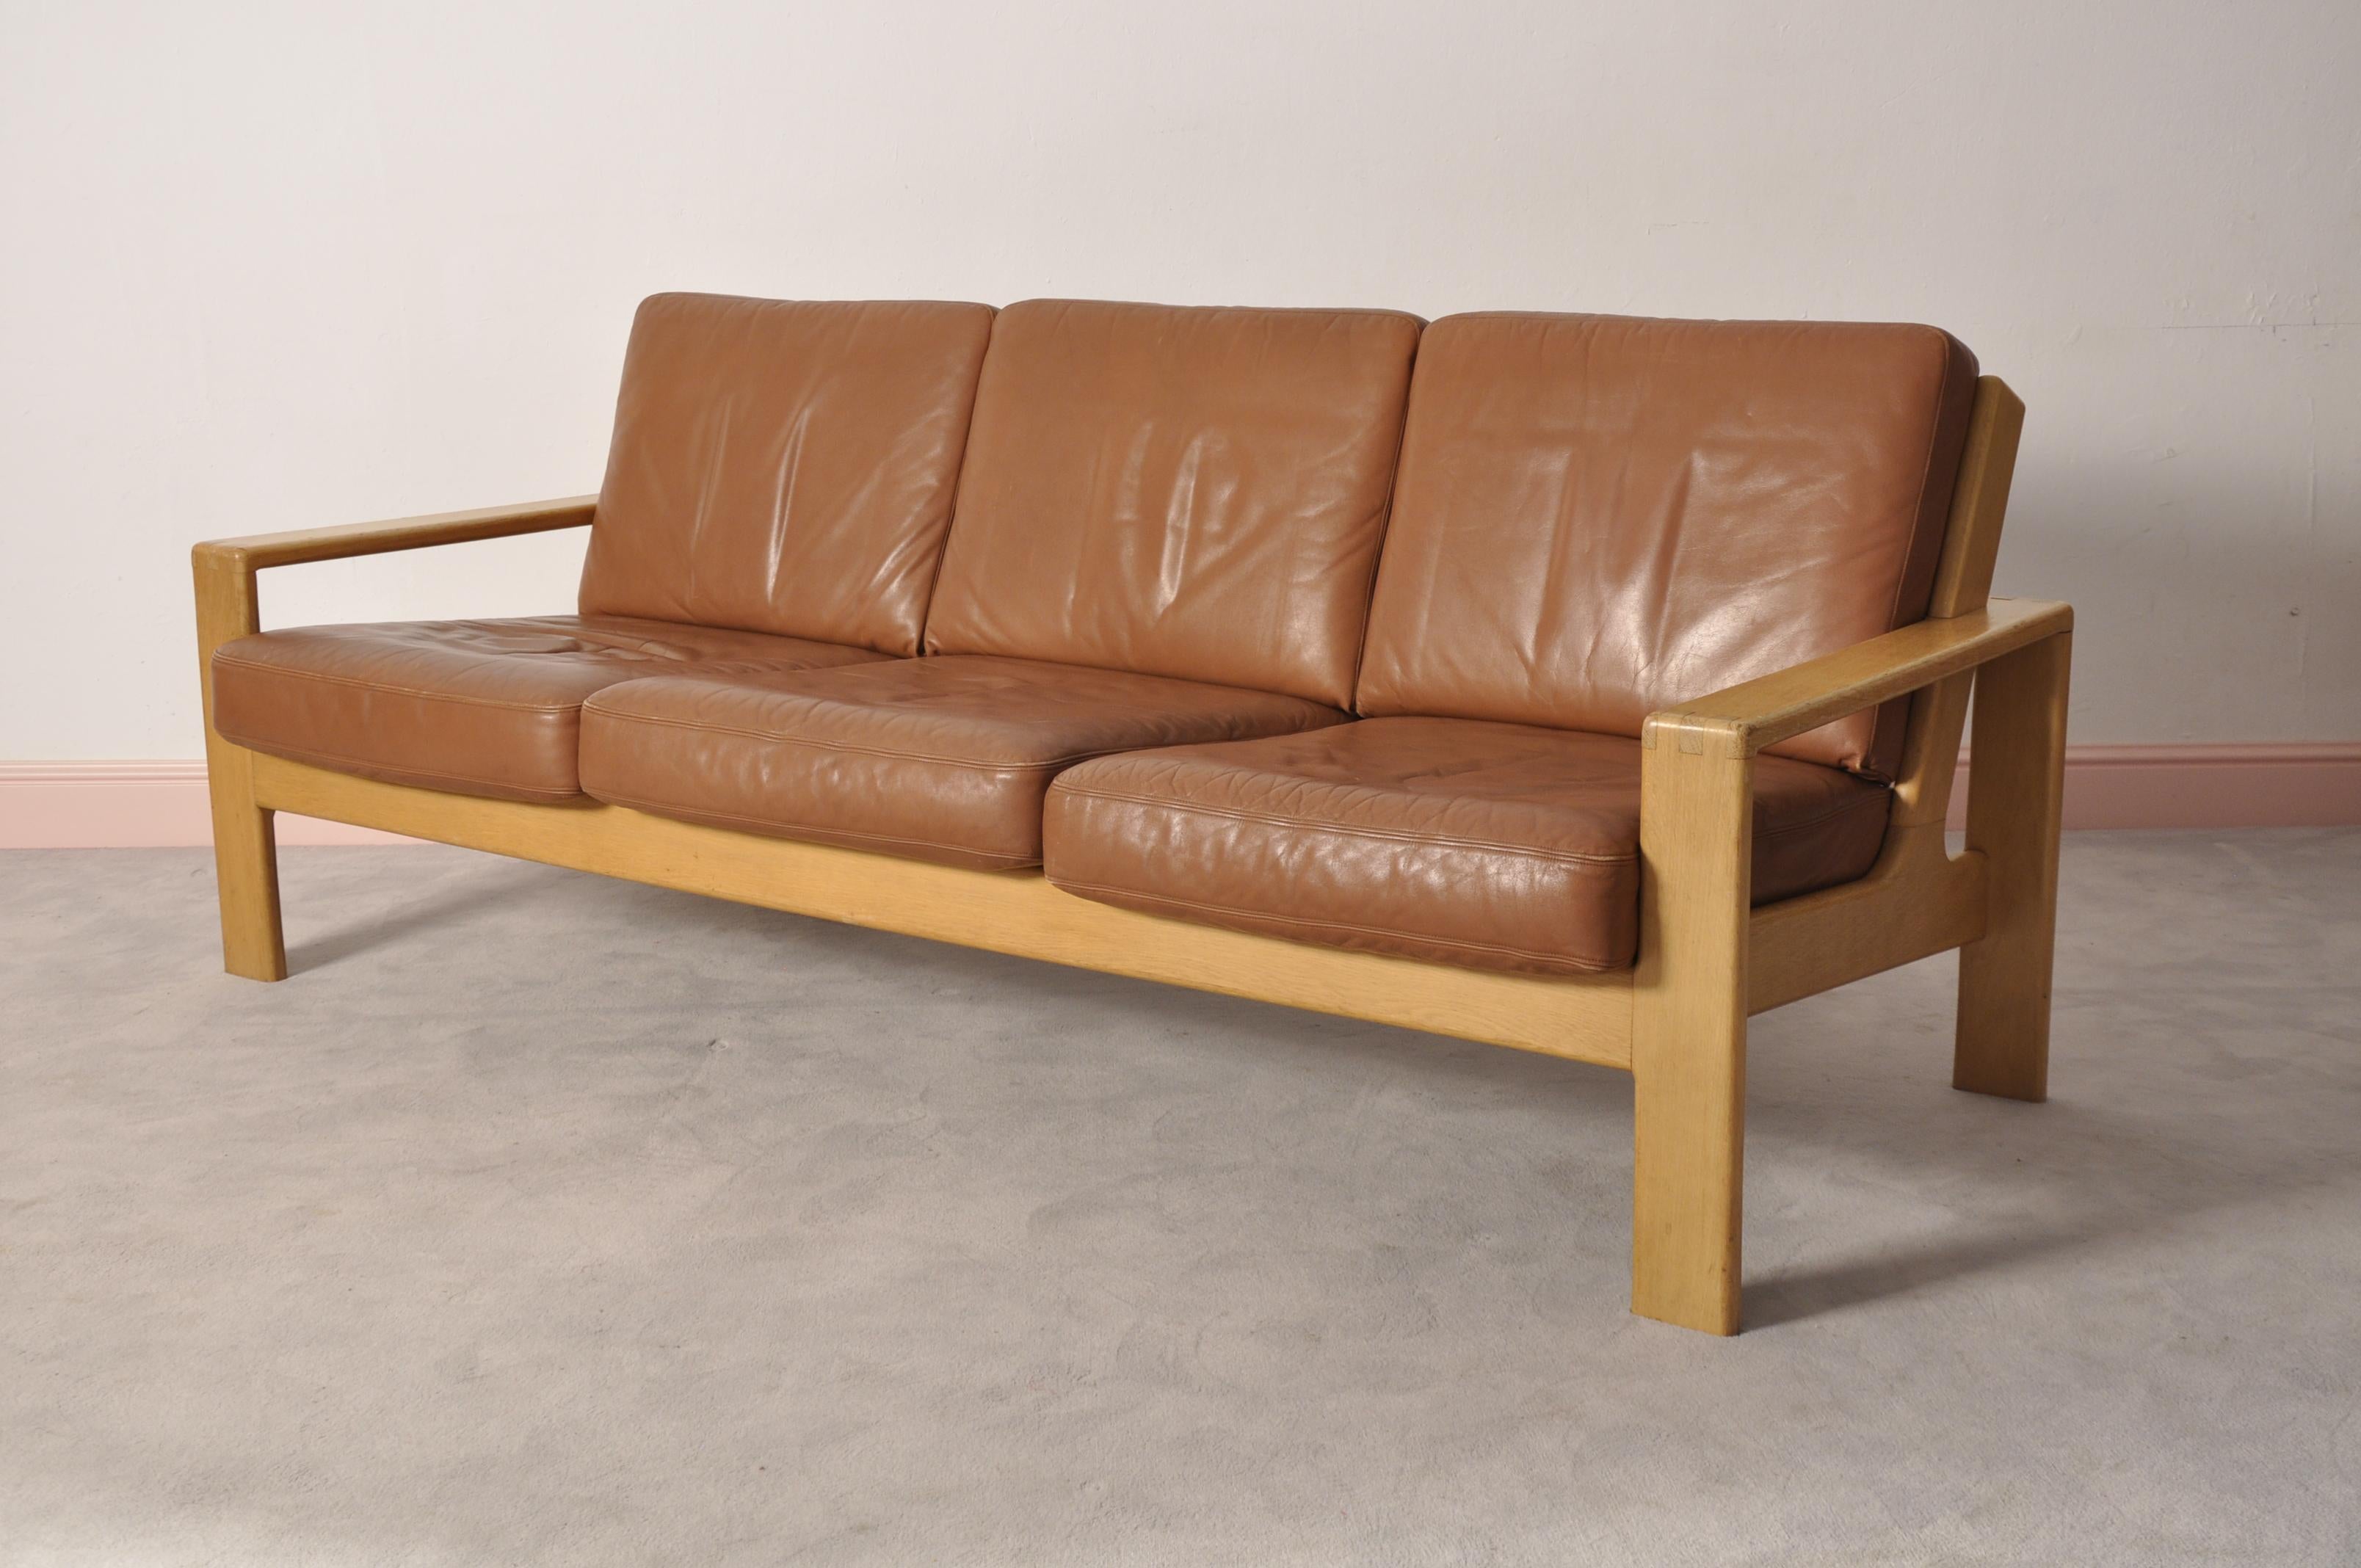 Organic Design form the late 1960s. Frame made from massive oakwood, cognac-collored leather cover. Feather filled cushions. Modern seat hight (38cm).